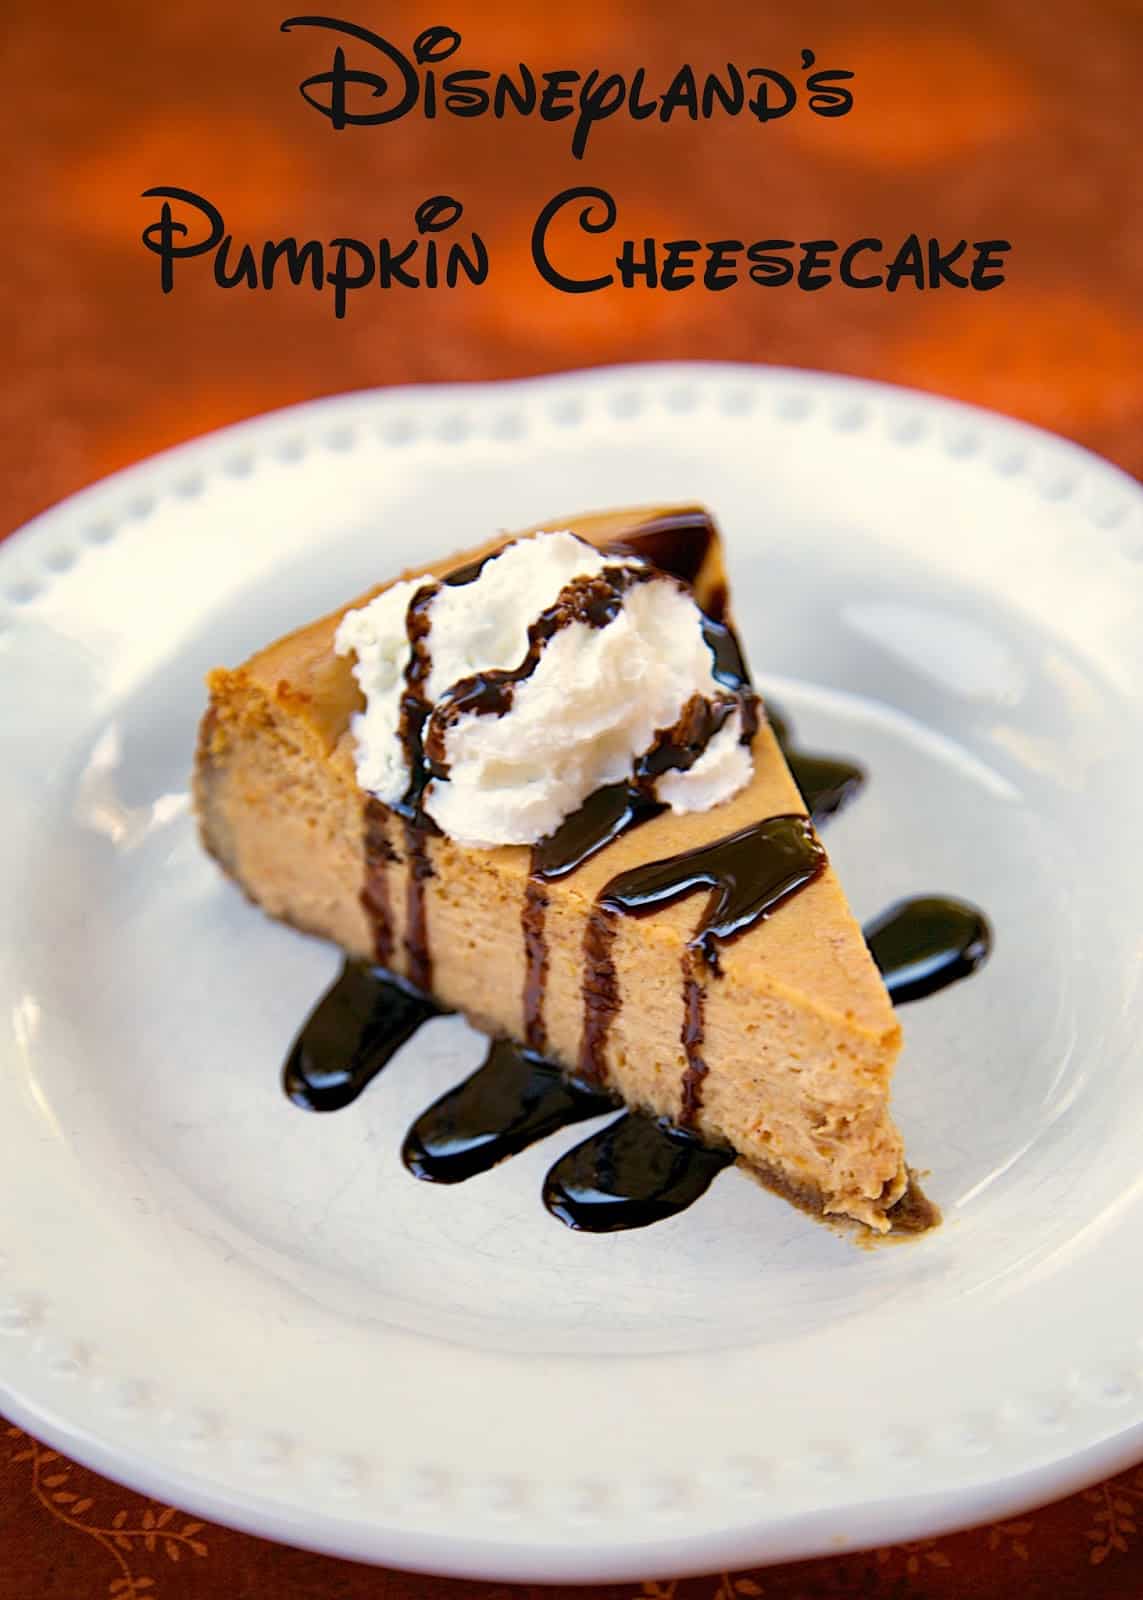 Disneyland's Pumpkin Cheesecake Recipe - great dessert for the holidays. Ready for the oven in 20 minutes. SO delicious! Biscoff cookie crust filled with cream cheese, sugar, pumpkin, eggs, evaporated milk, cinnamon and nutmeg. Even pumpkin haters LOVED this delicious cheesecake recipe!